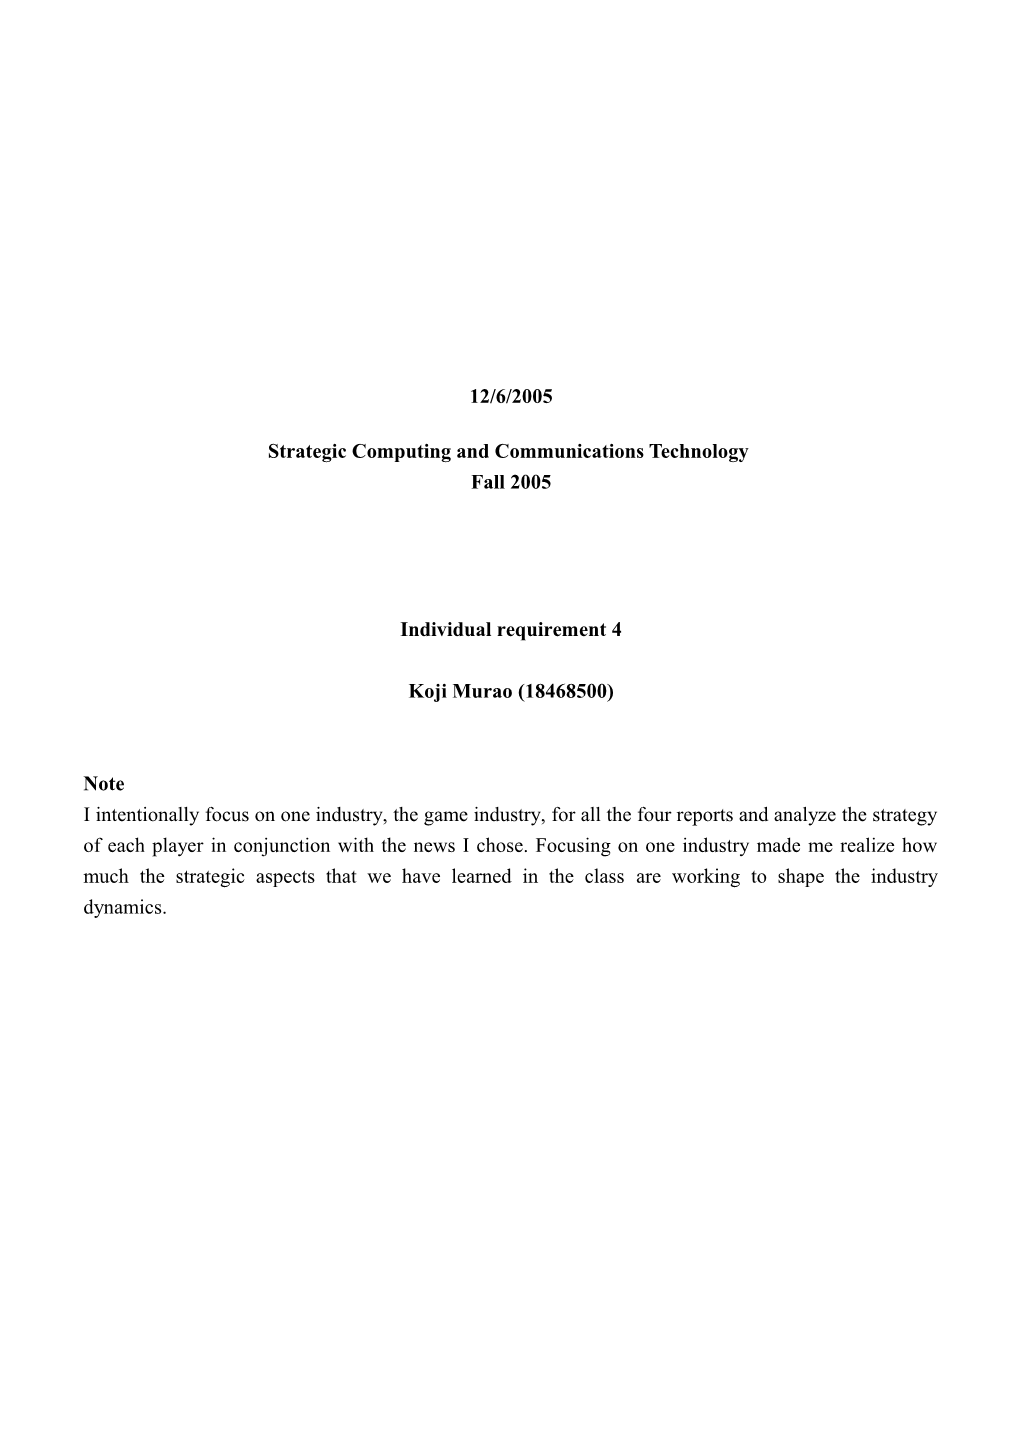 Strategic Computing and Communications Technology: Individual Requirement 4